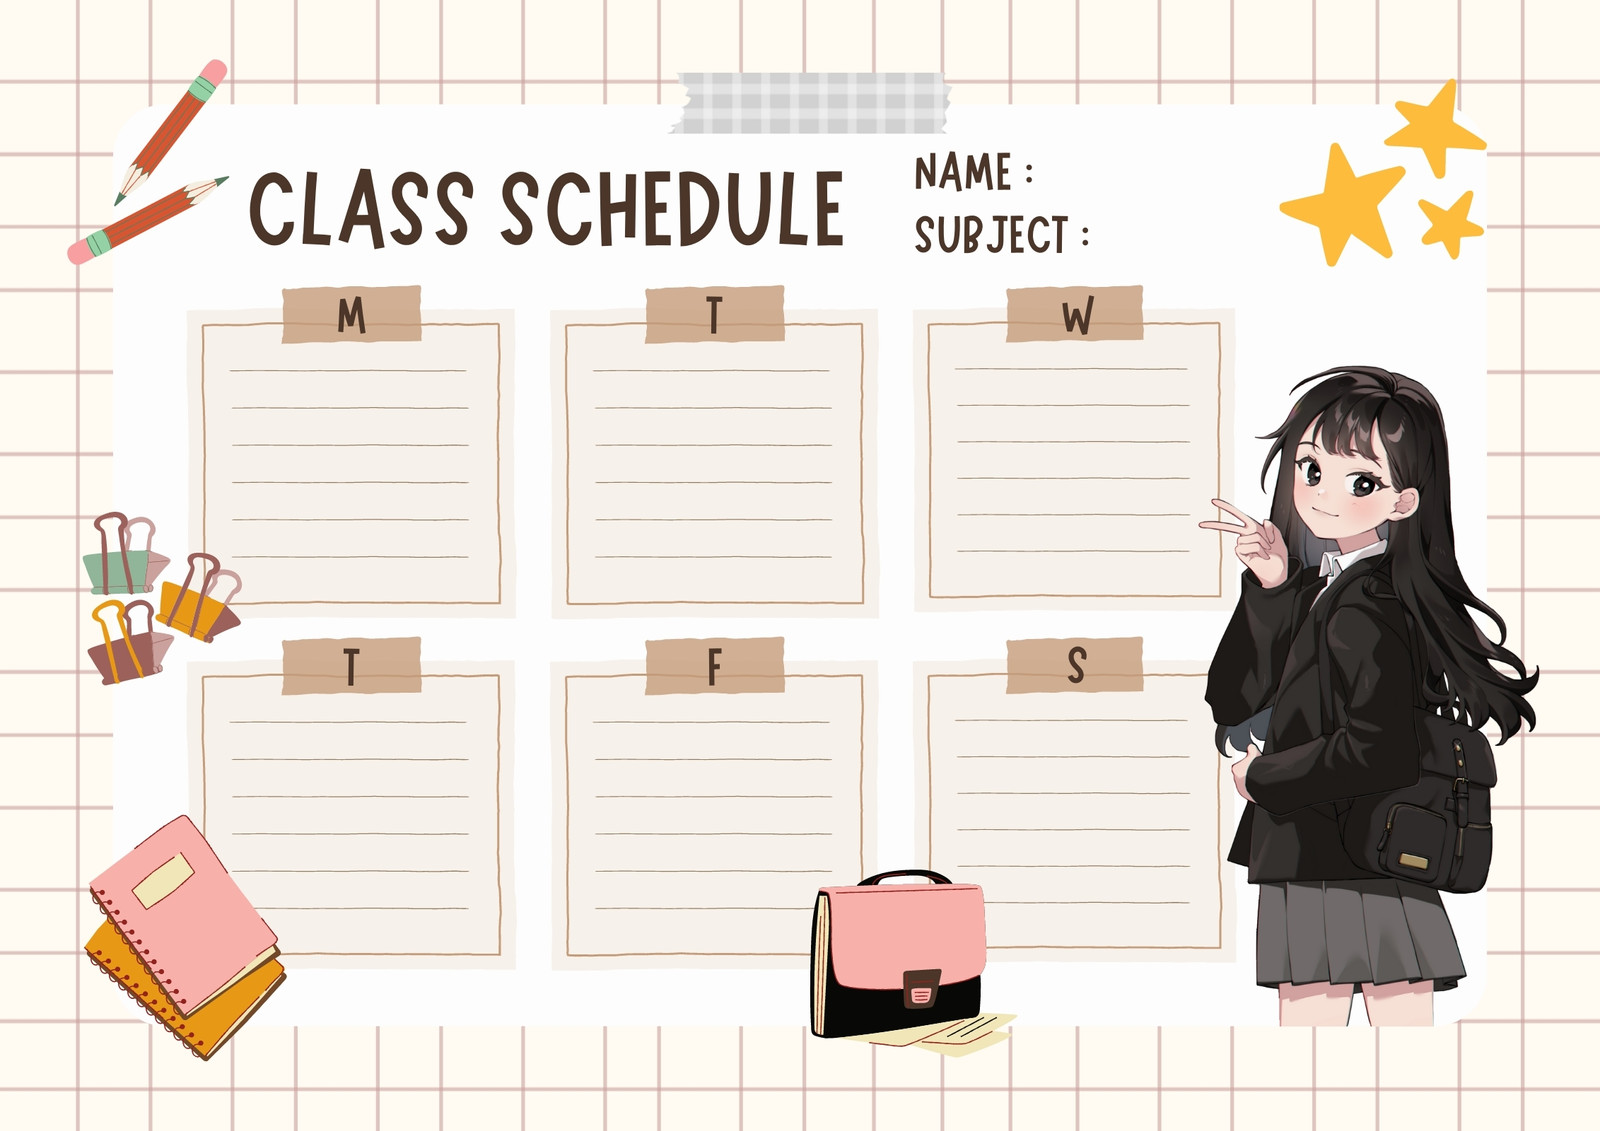 Share more than 164 anime convention schedule - awesomeenglish.edu.vn